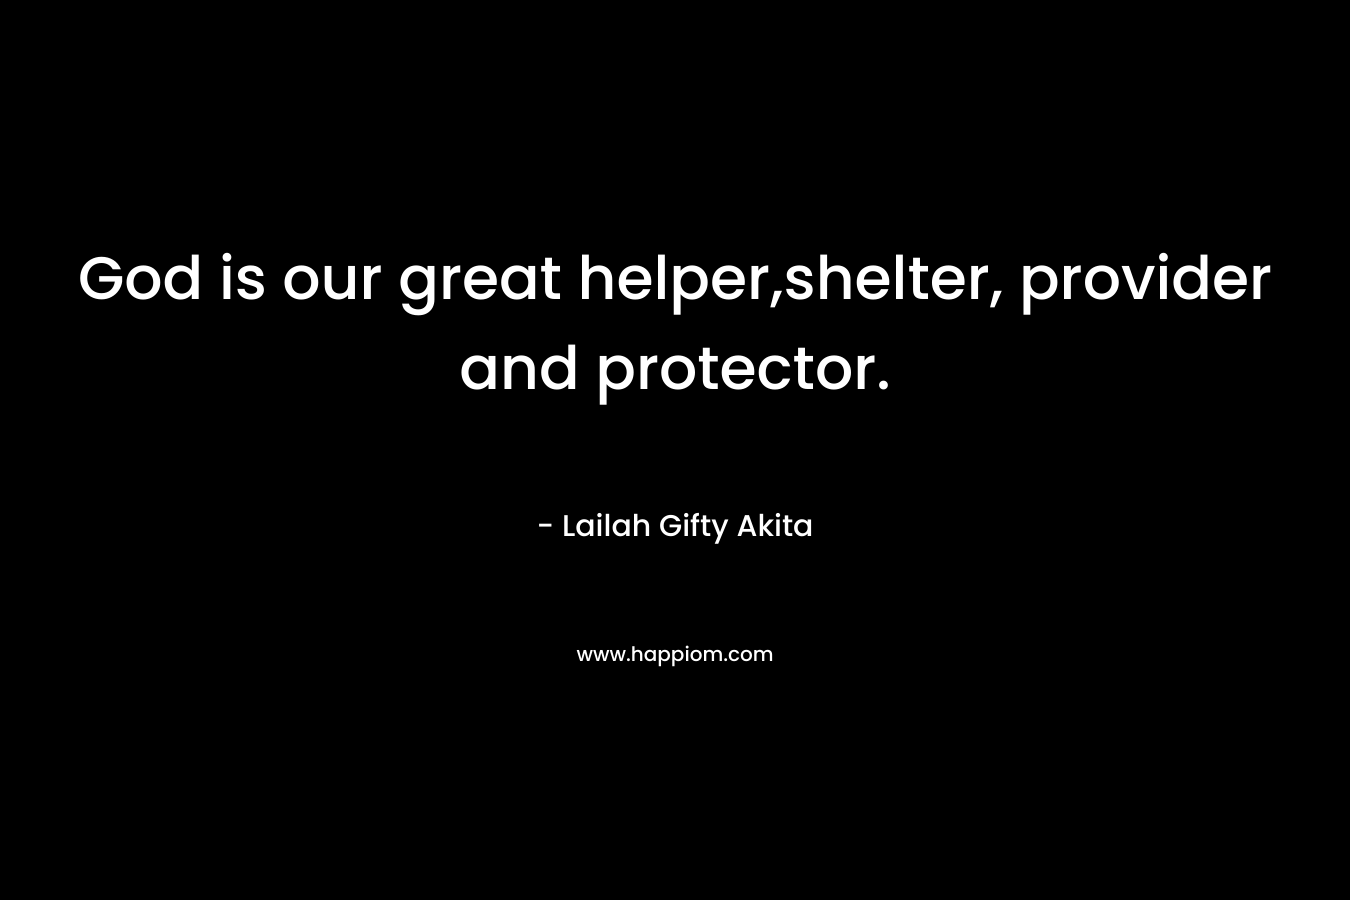 God is our great helper,shelter, provider and protector.